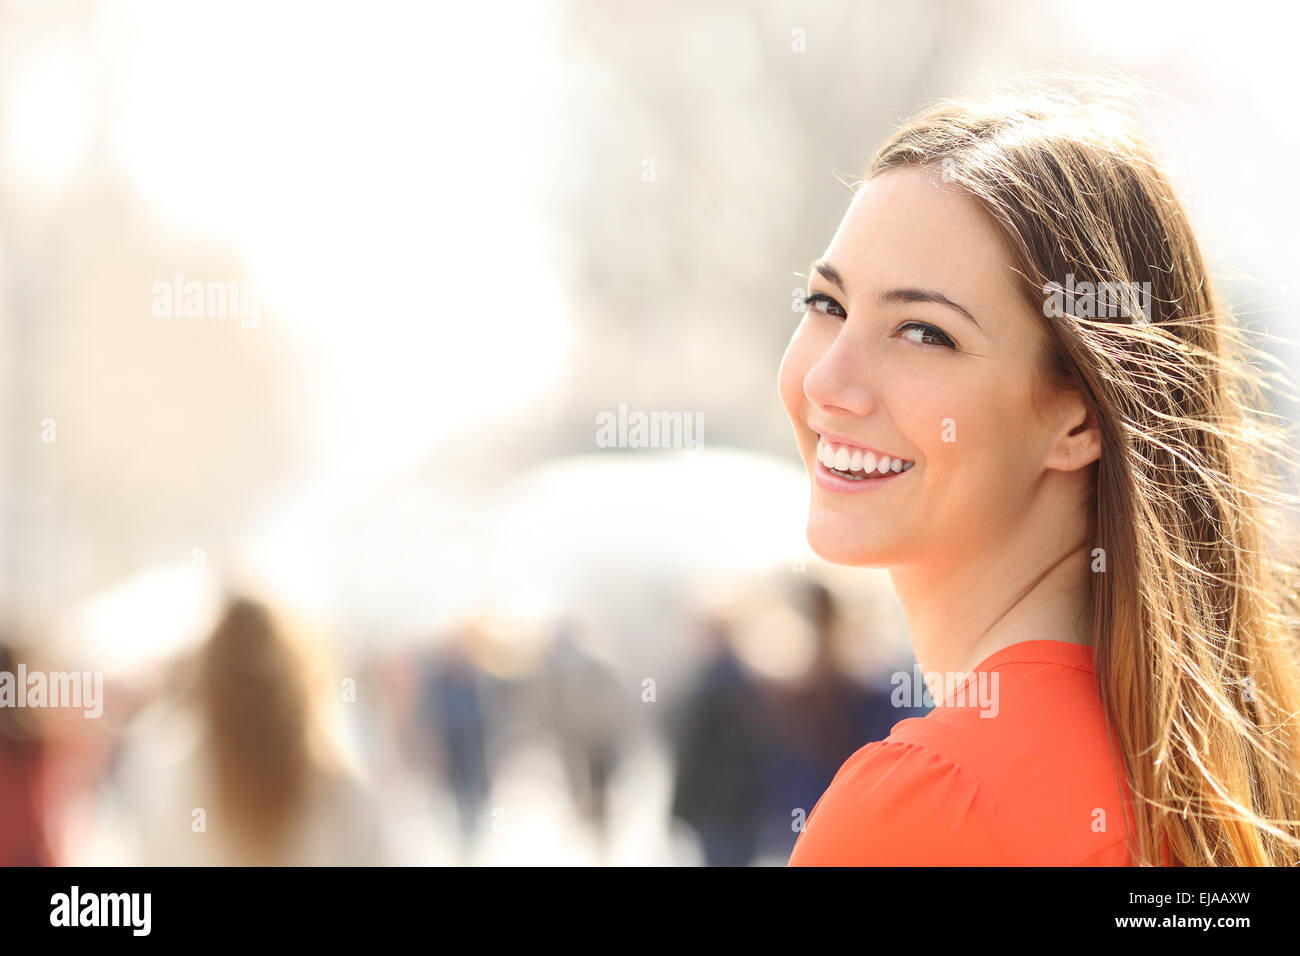 Beauty woman with perfect smile and white teeth walking on the street and looking at camera Stock Photo